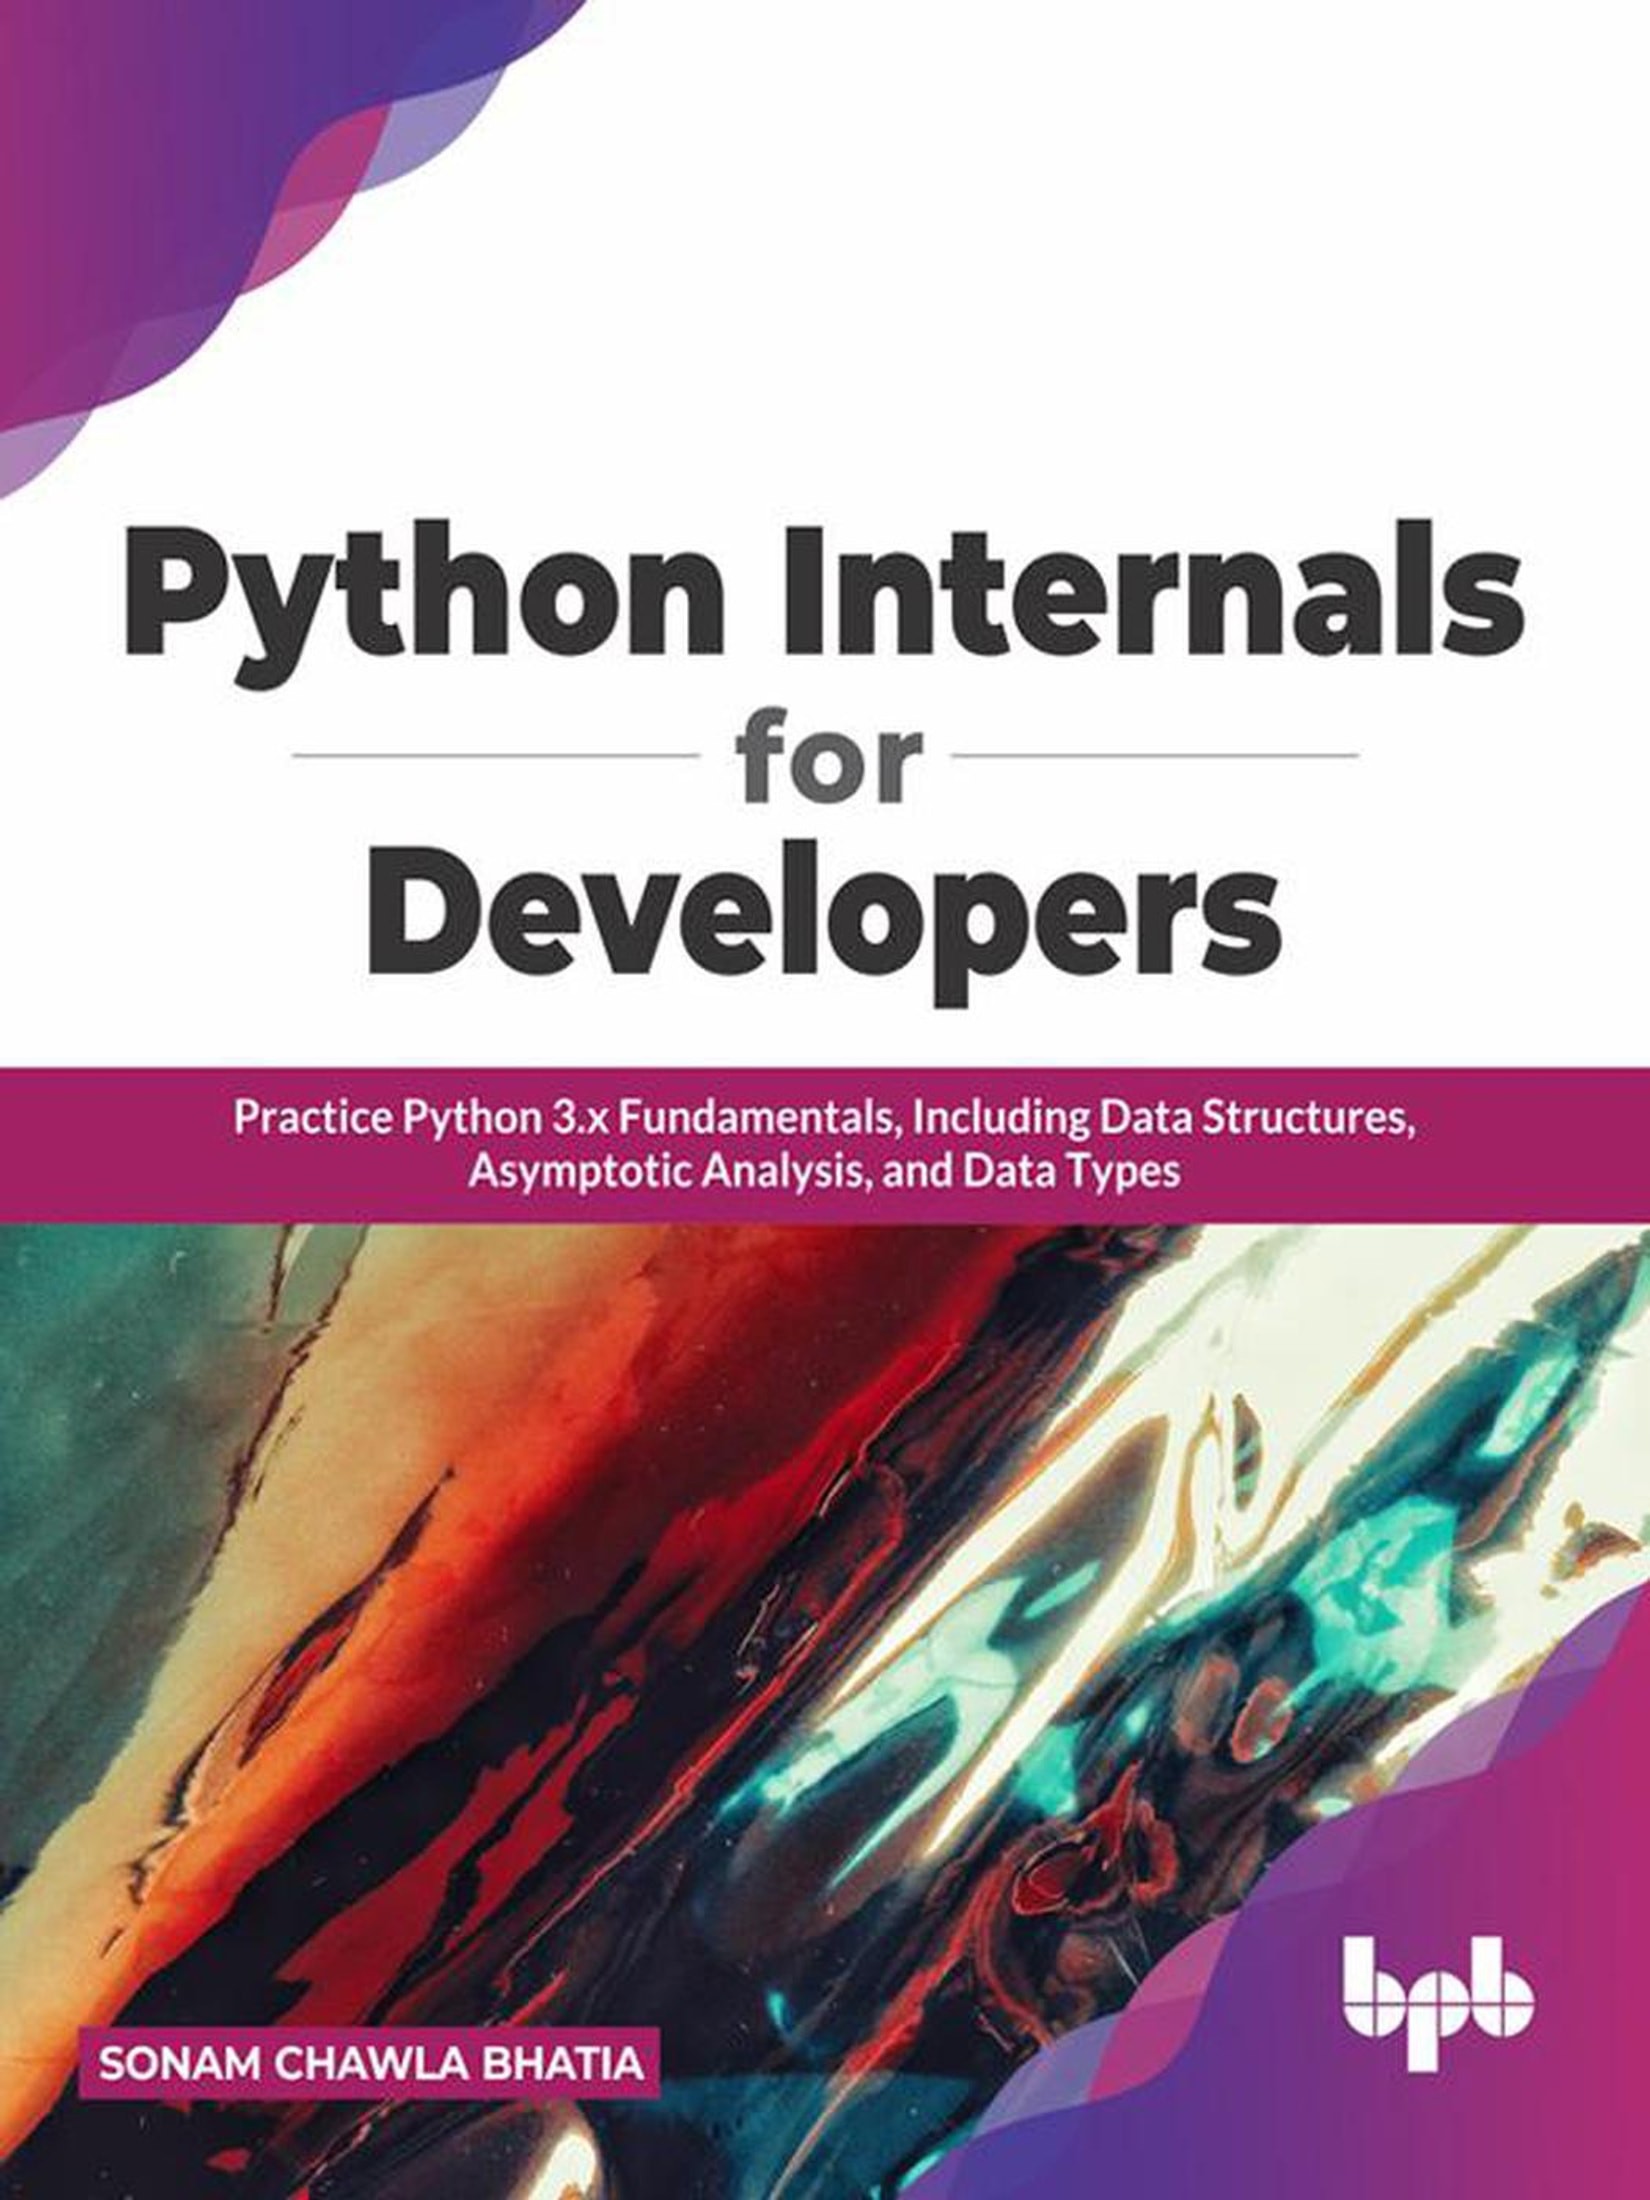 Python Internals for Developers: Practice Python 3.x Fundamentals, Including Data Structures, Asymptotic Analysis, and Data Types (English Edition)